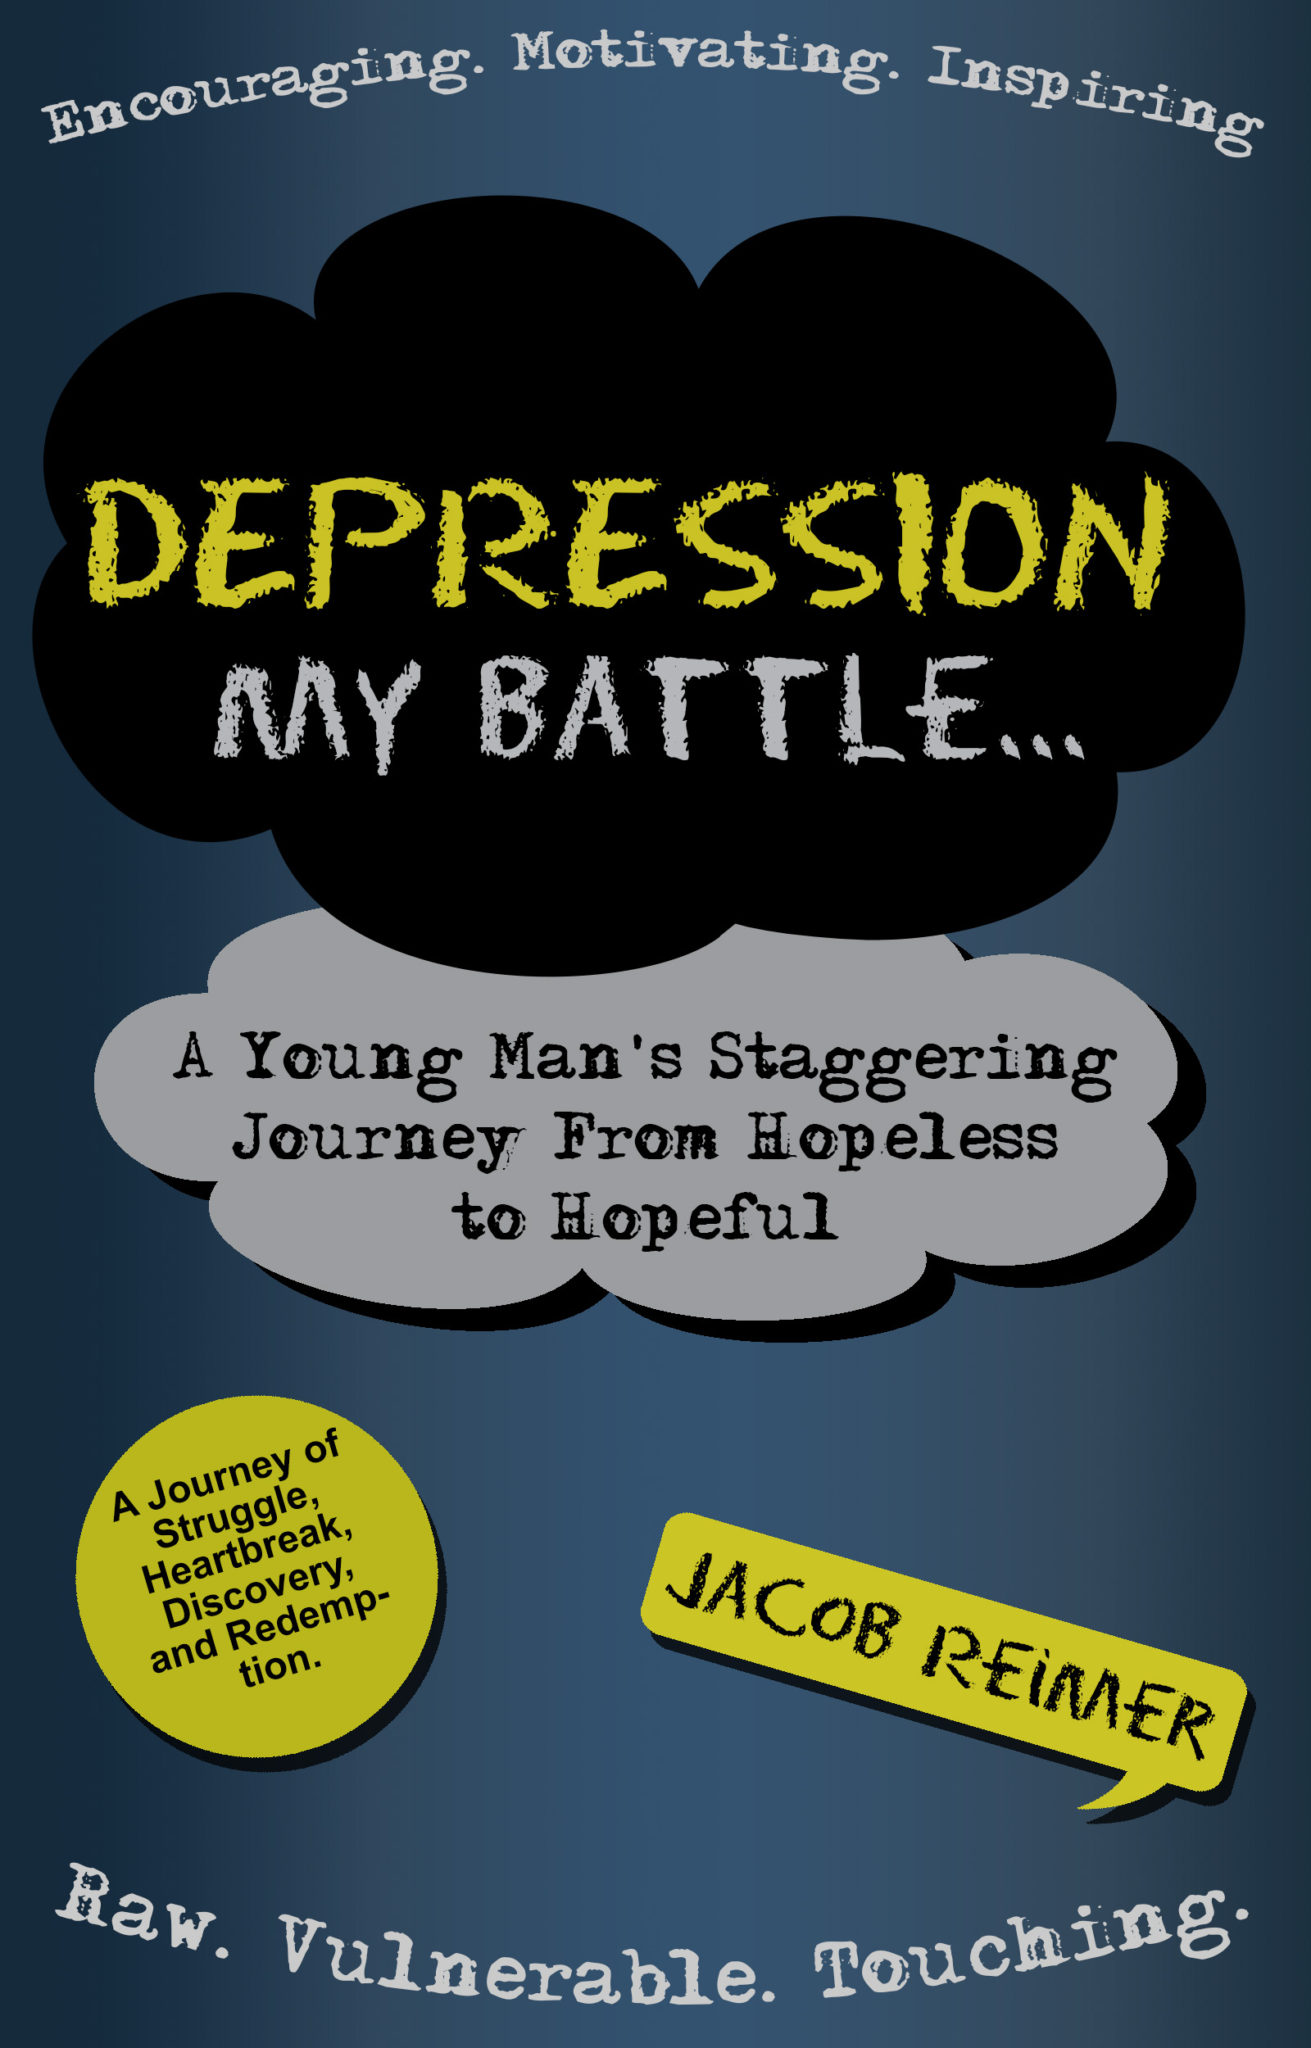 Depression: My Battle – A Young Man’s Staggering Journey From Hopeless To Hopeful by Jacob Reimer